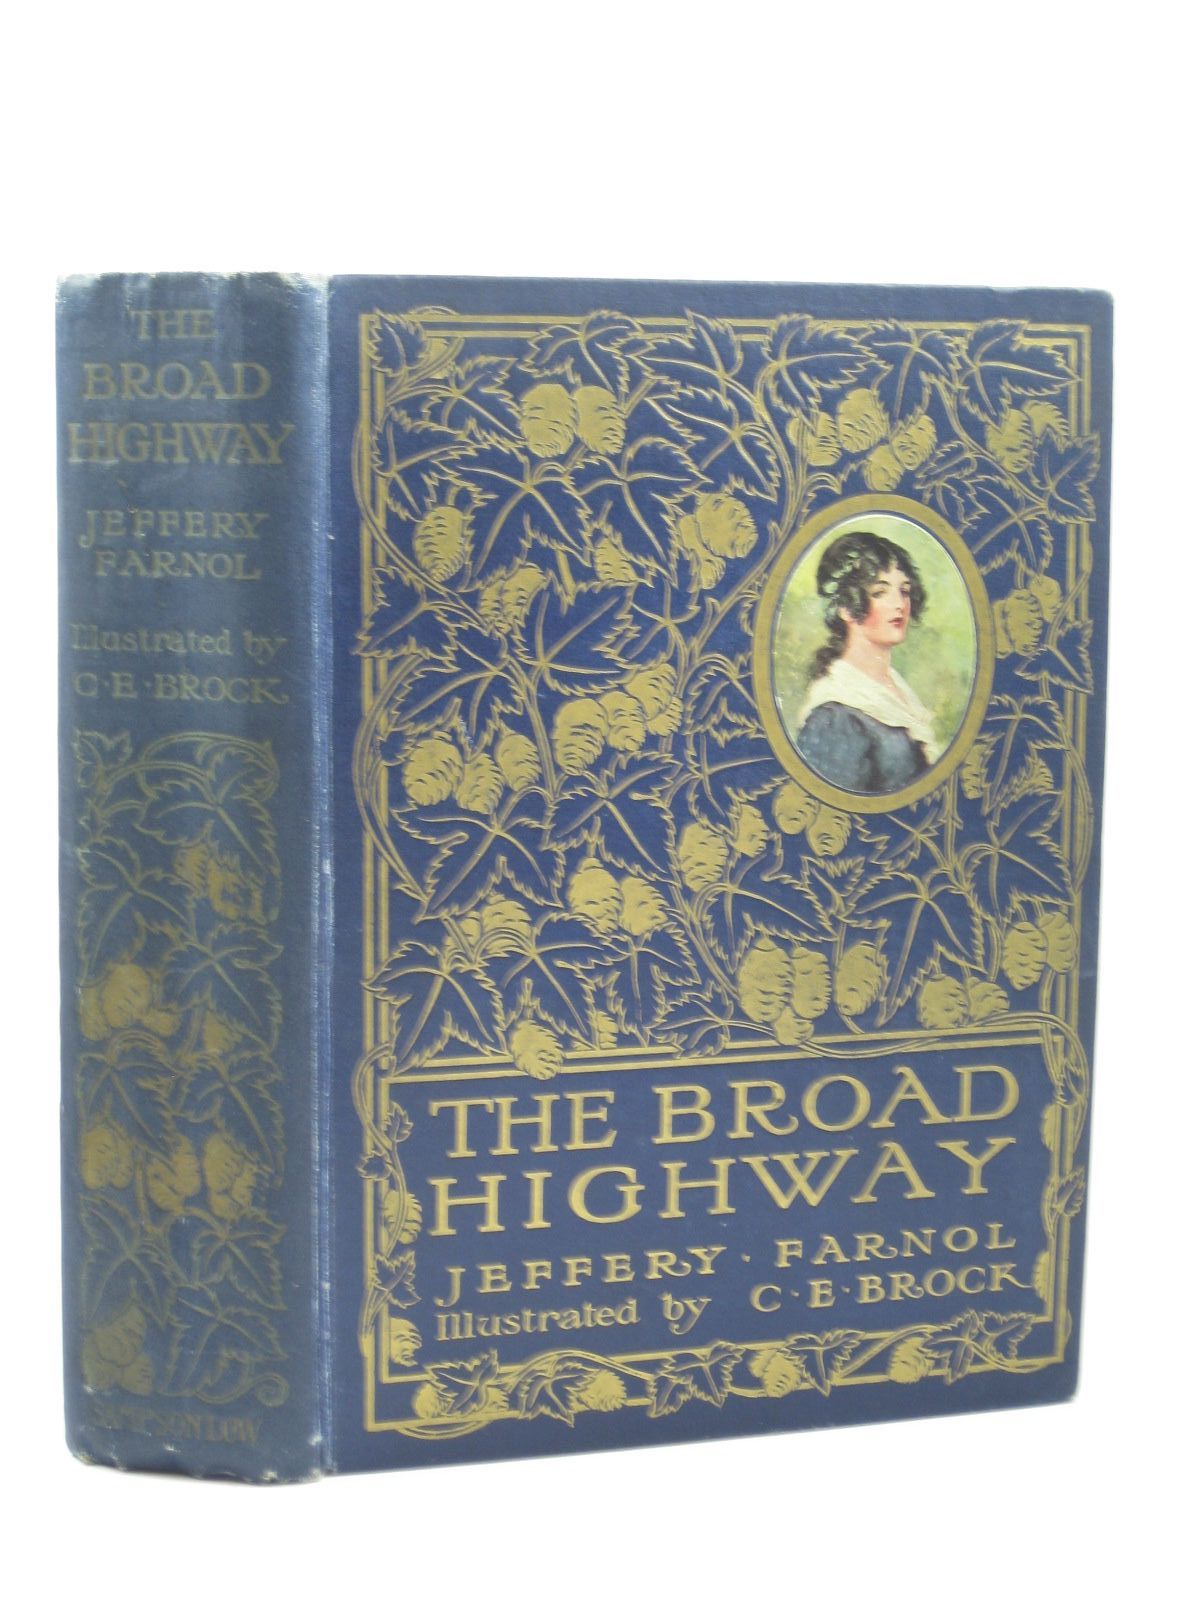 Photo of THE BROAD HIGHWAY written by Farnol, Jeffery illustrated by Brock, C.E. published by Sampson Low, Marston & Co. Ltd. (STOCK CODE: 1502327)  for sale by Stella & Rose's Books